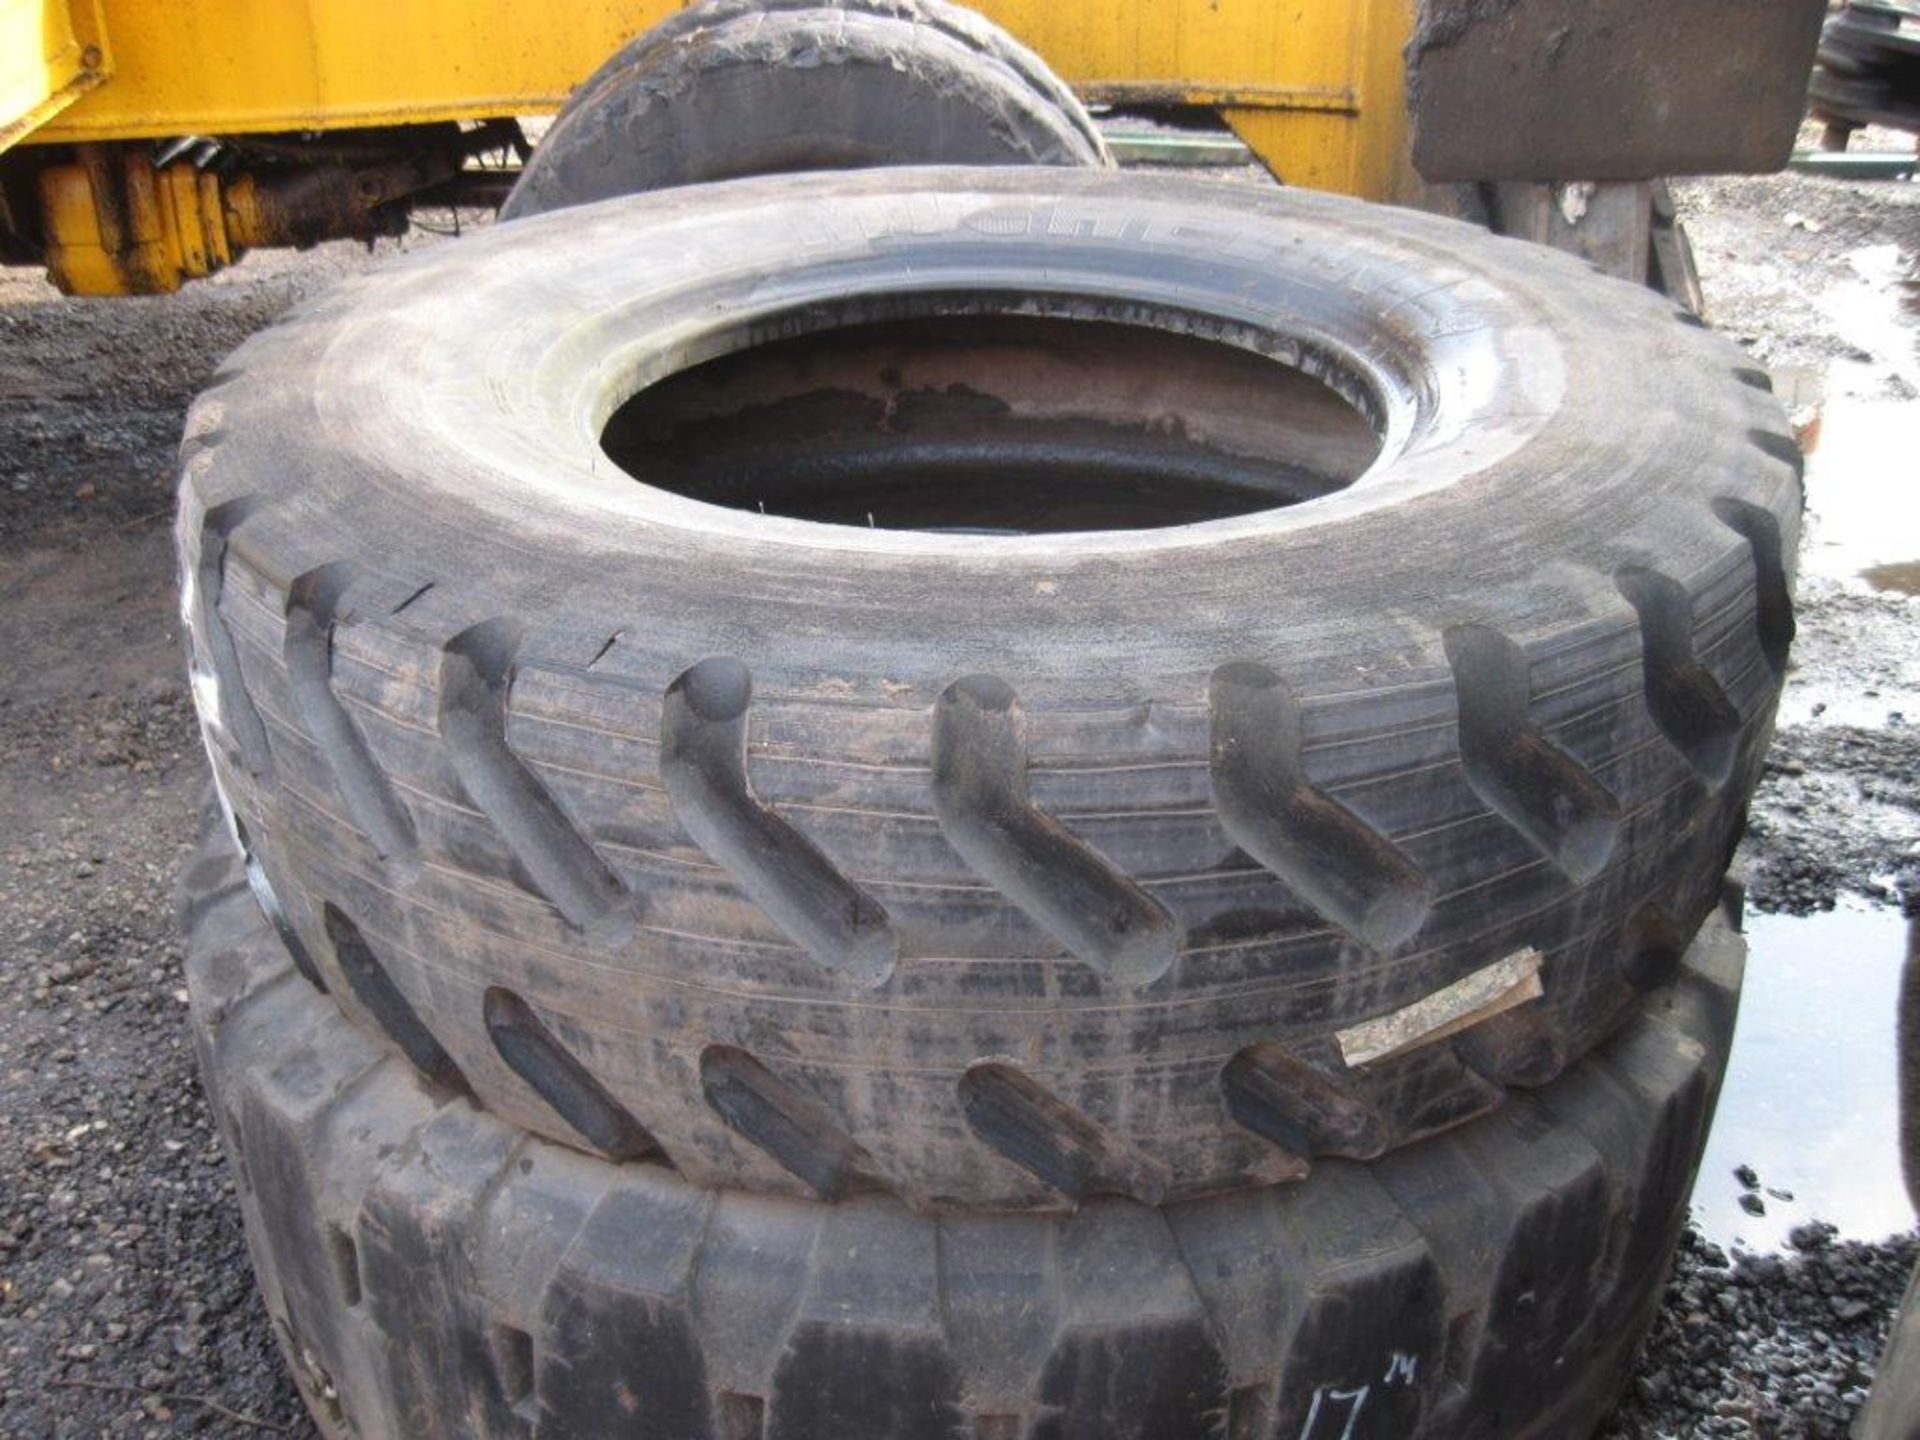 15.5 R 25 Tyre
Recently remoulded michelin casing